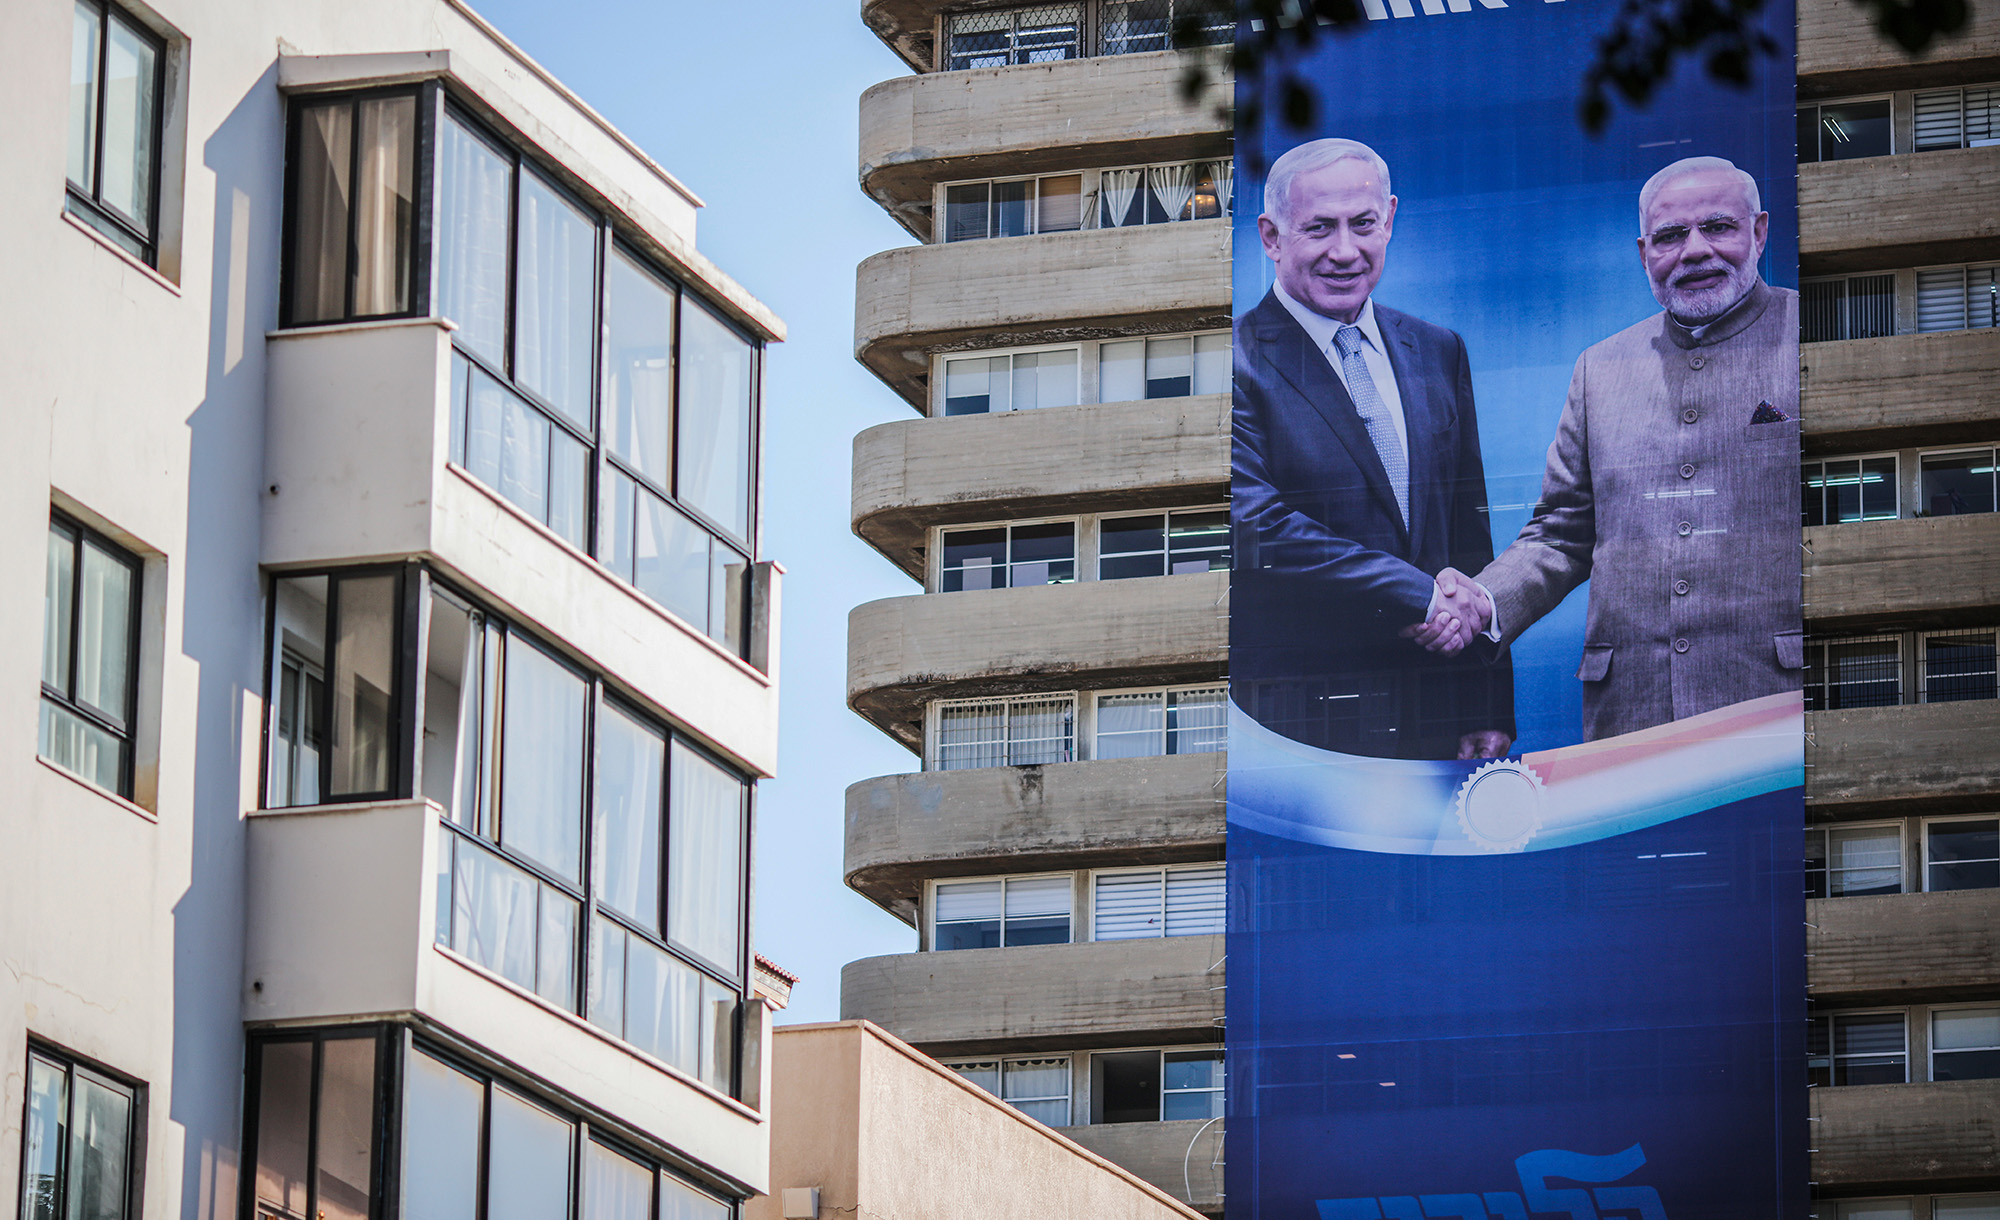 An election campaign banner showing Benjamin Netanyahu shaking hands with Narendra Modi in September 2019. Ilia Yefimovich/picture alliance via Getty Images.
